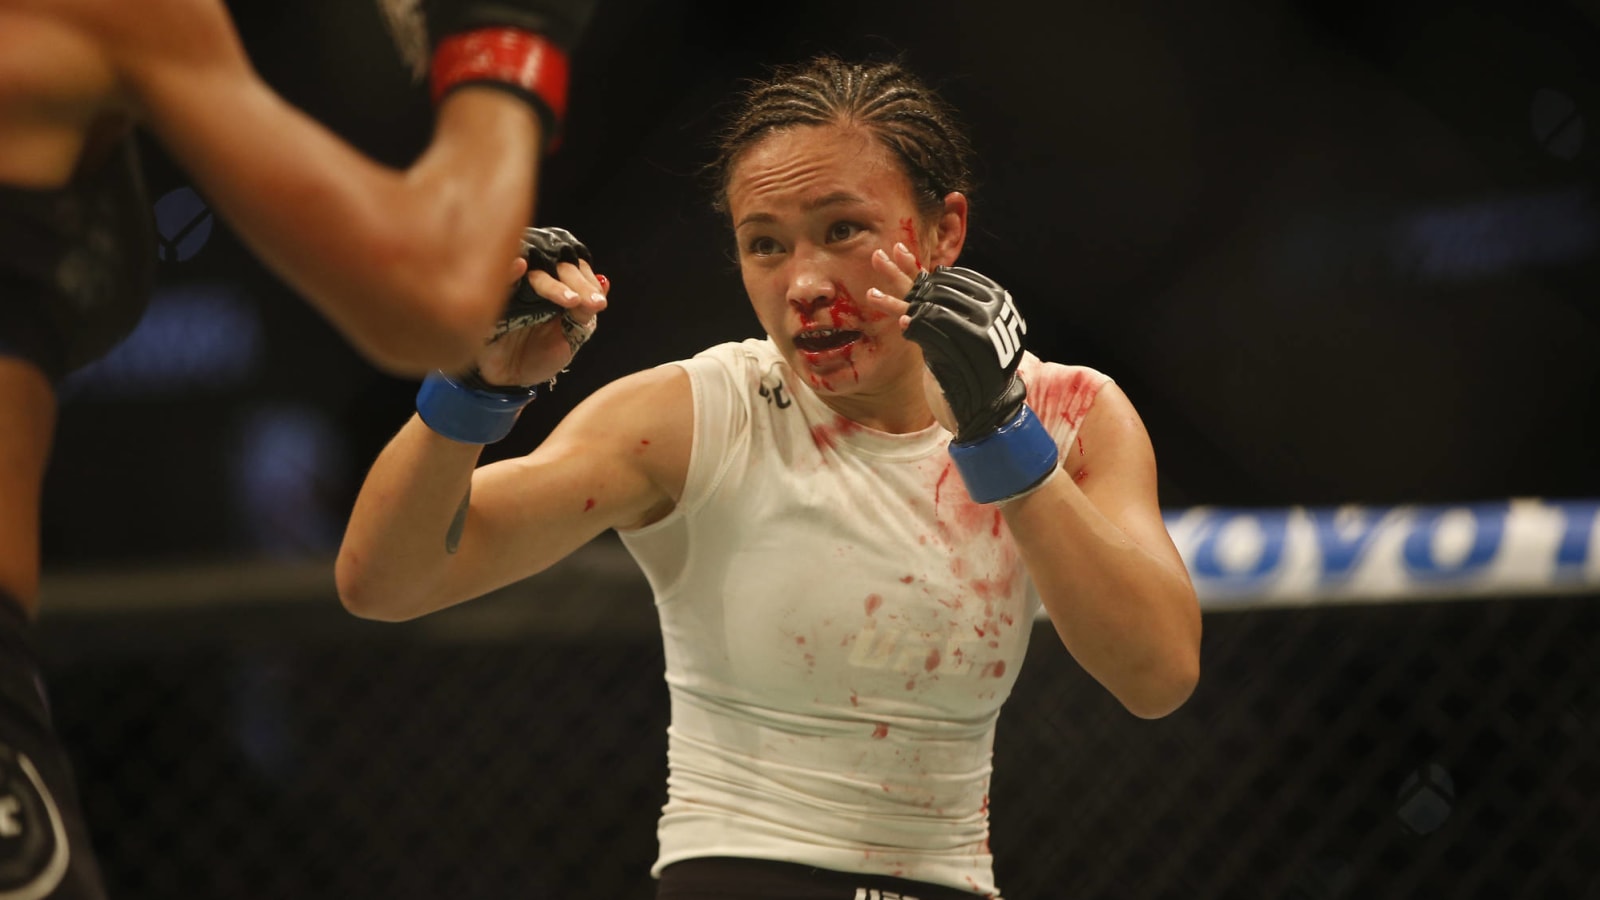 Michelle Waterson vs. Angela Hill named new UFC on ESPN+ 35 main event